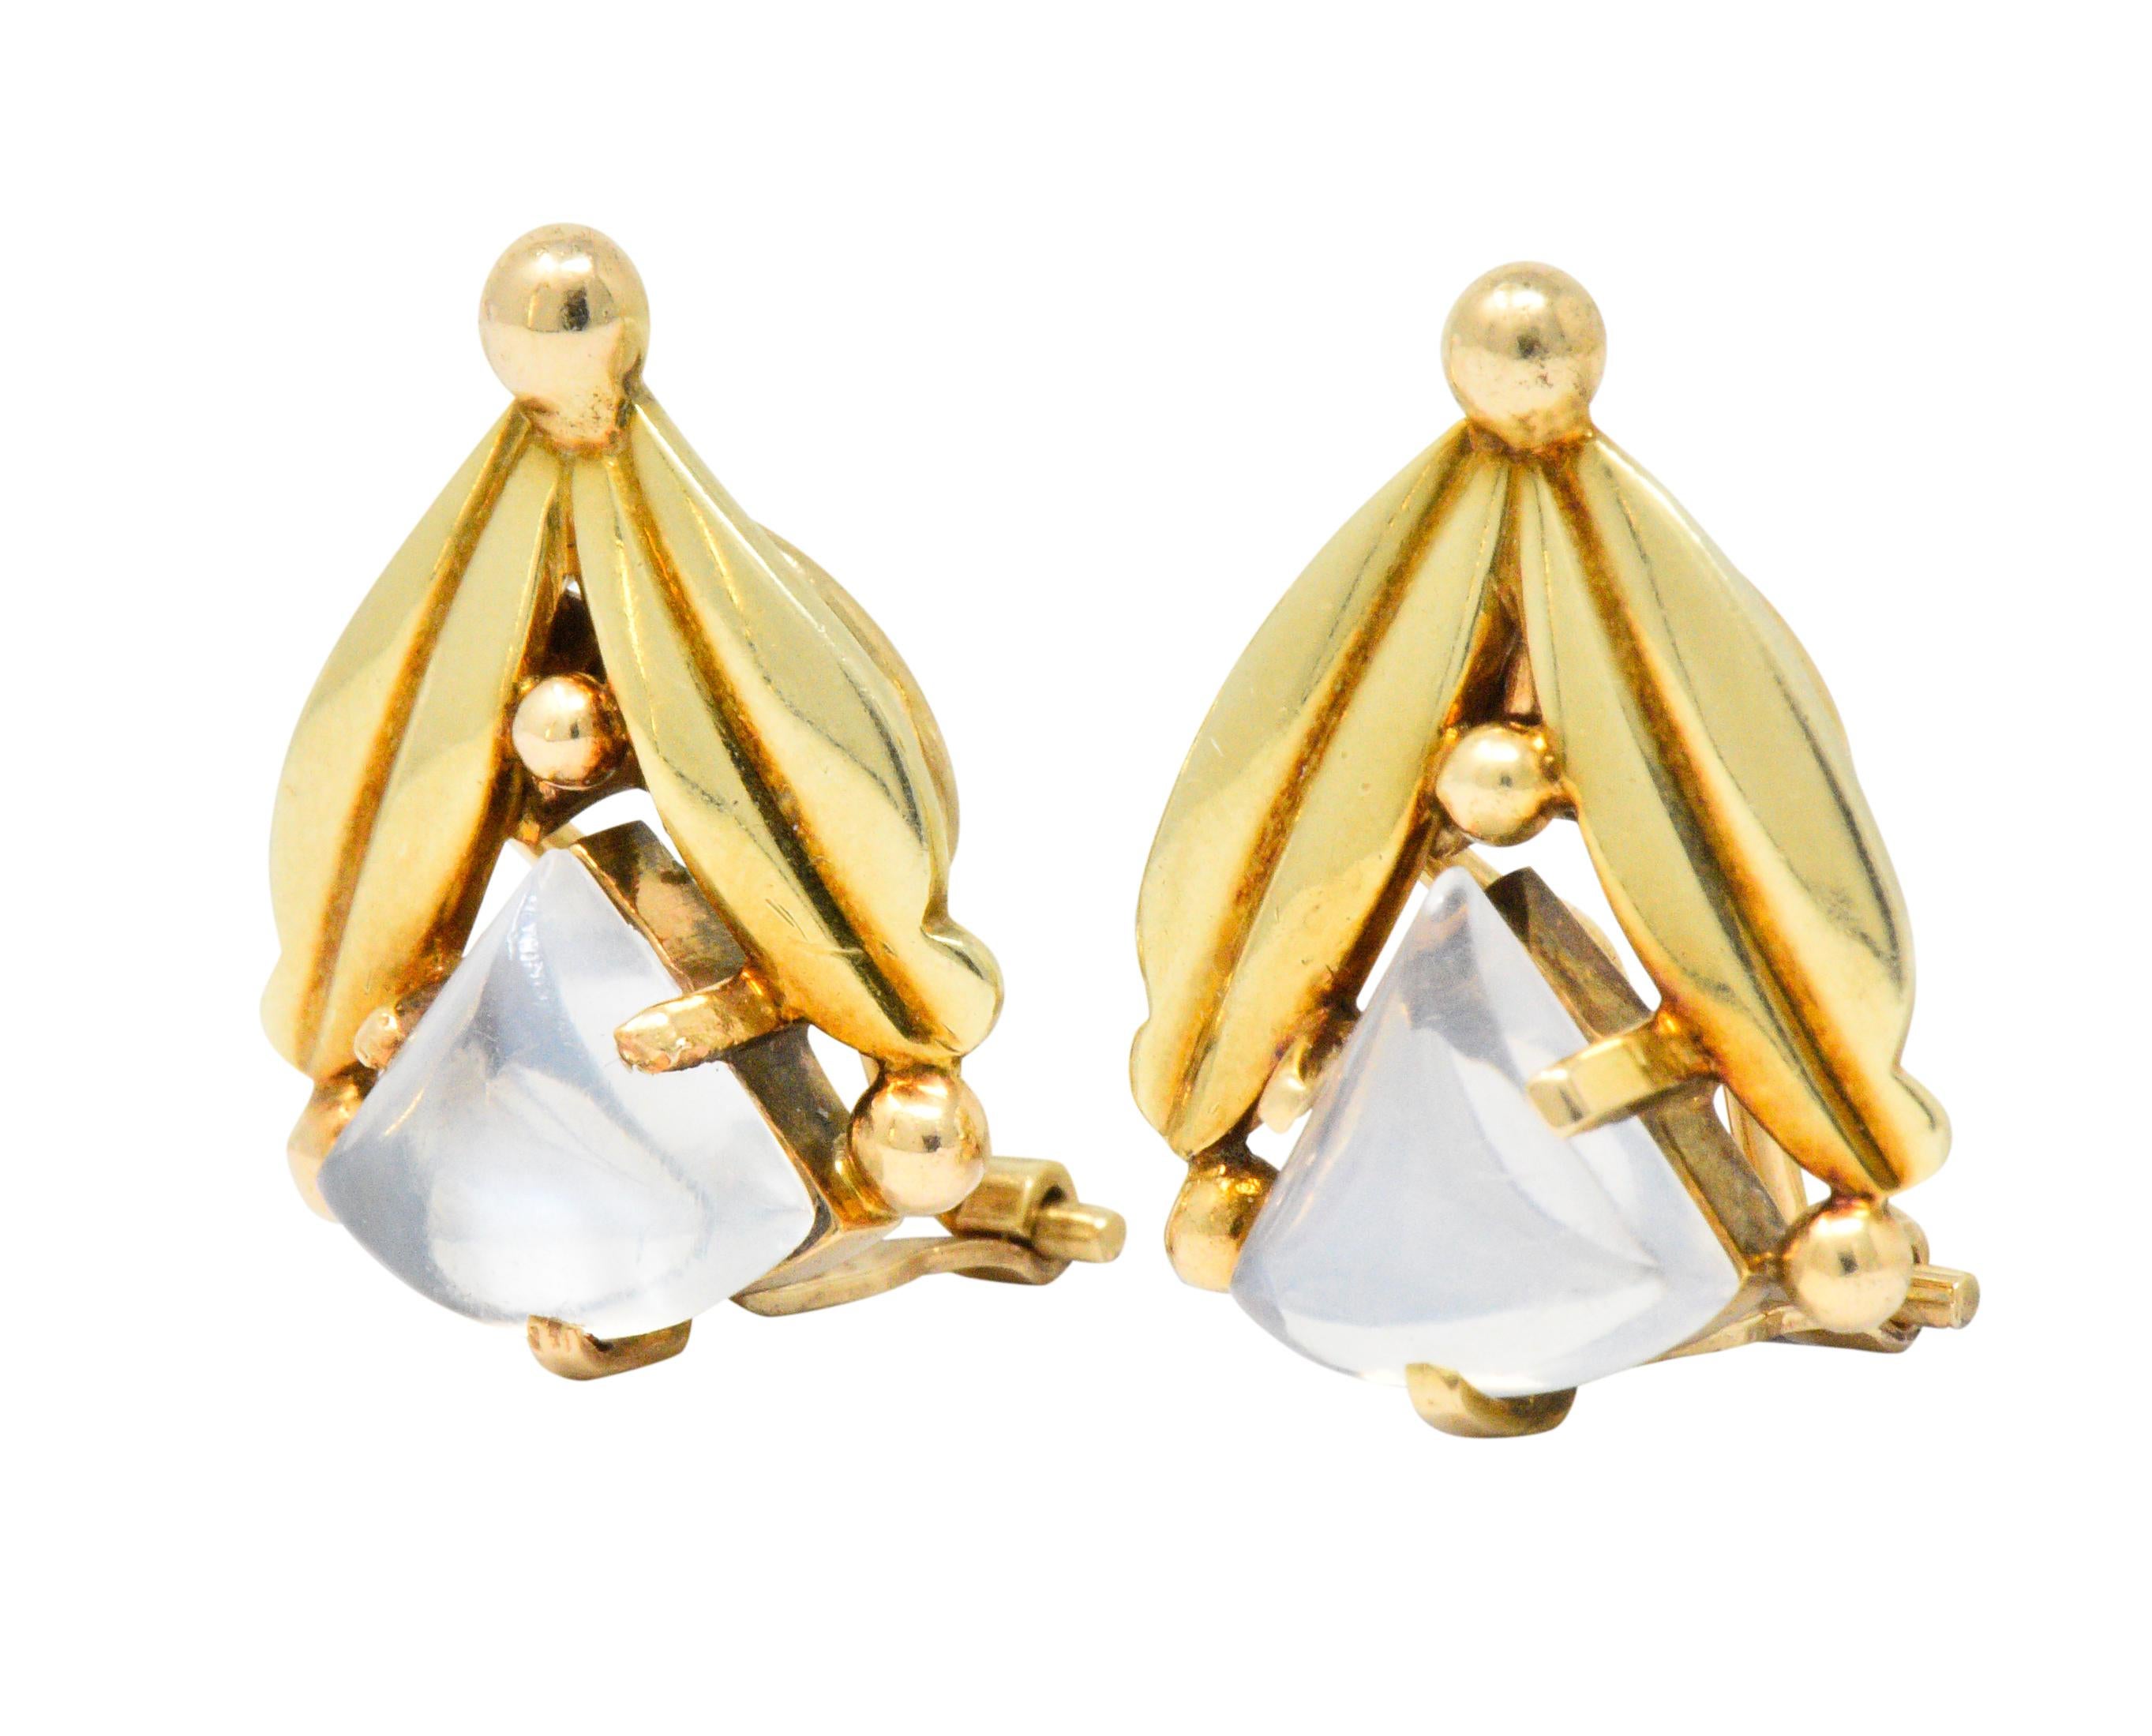 Earrings designed as two polished gold leaves, deeply grooved, in a V formation

Centering triangular cabochons of moonstone, measuring approximately 9.3 x 9.8 mm, translucent with billowy blue adularescence

Accented by polished gold